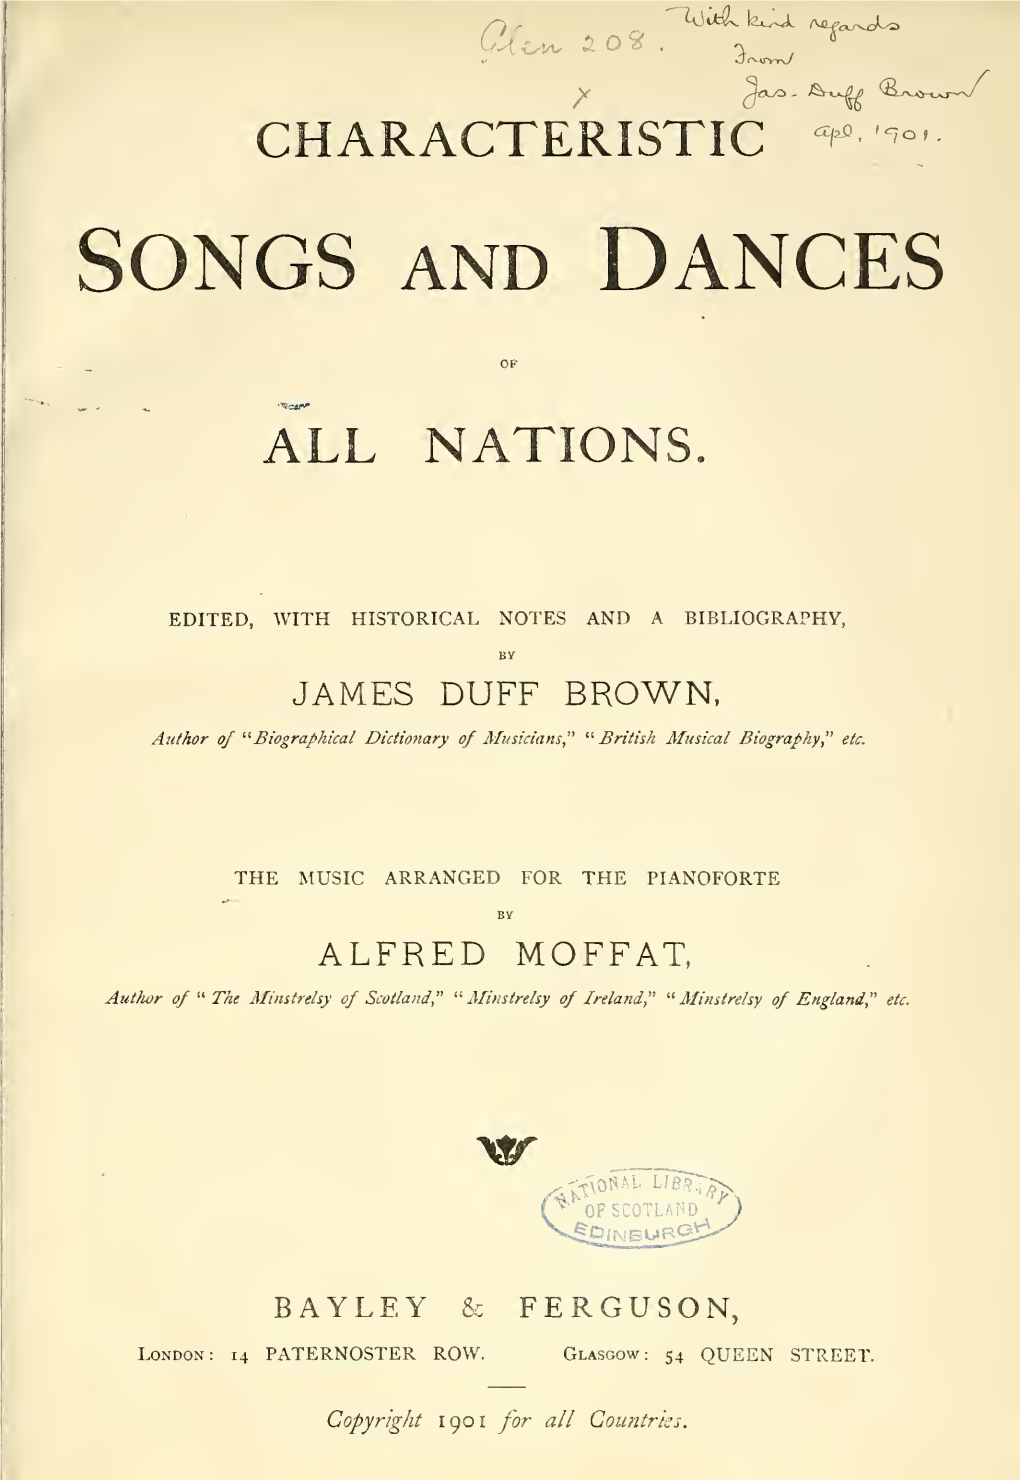 Characteristic Songs and Dances of All Nations